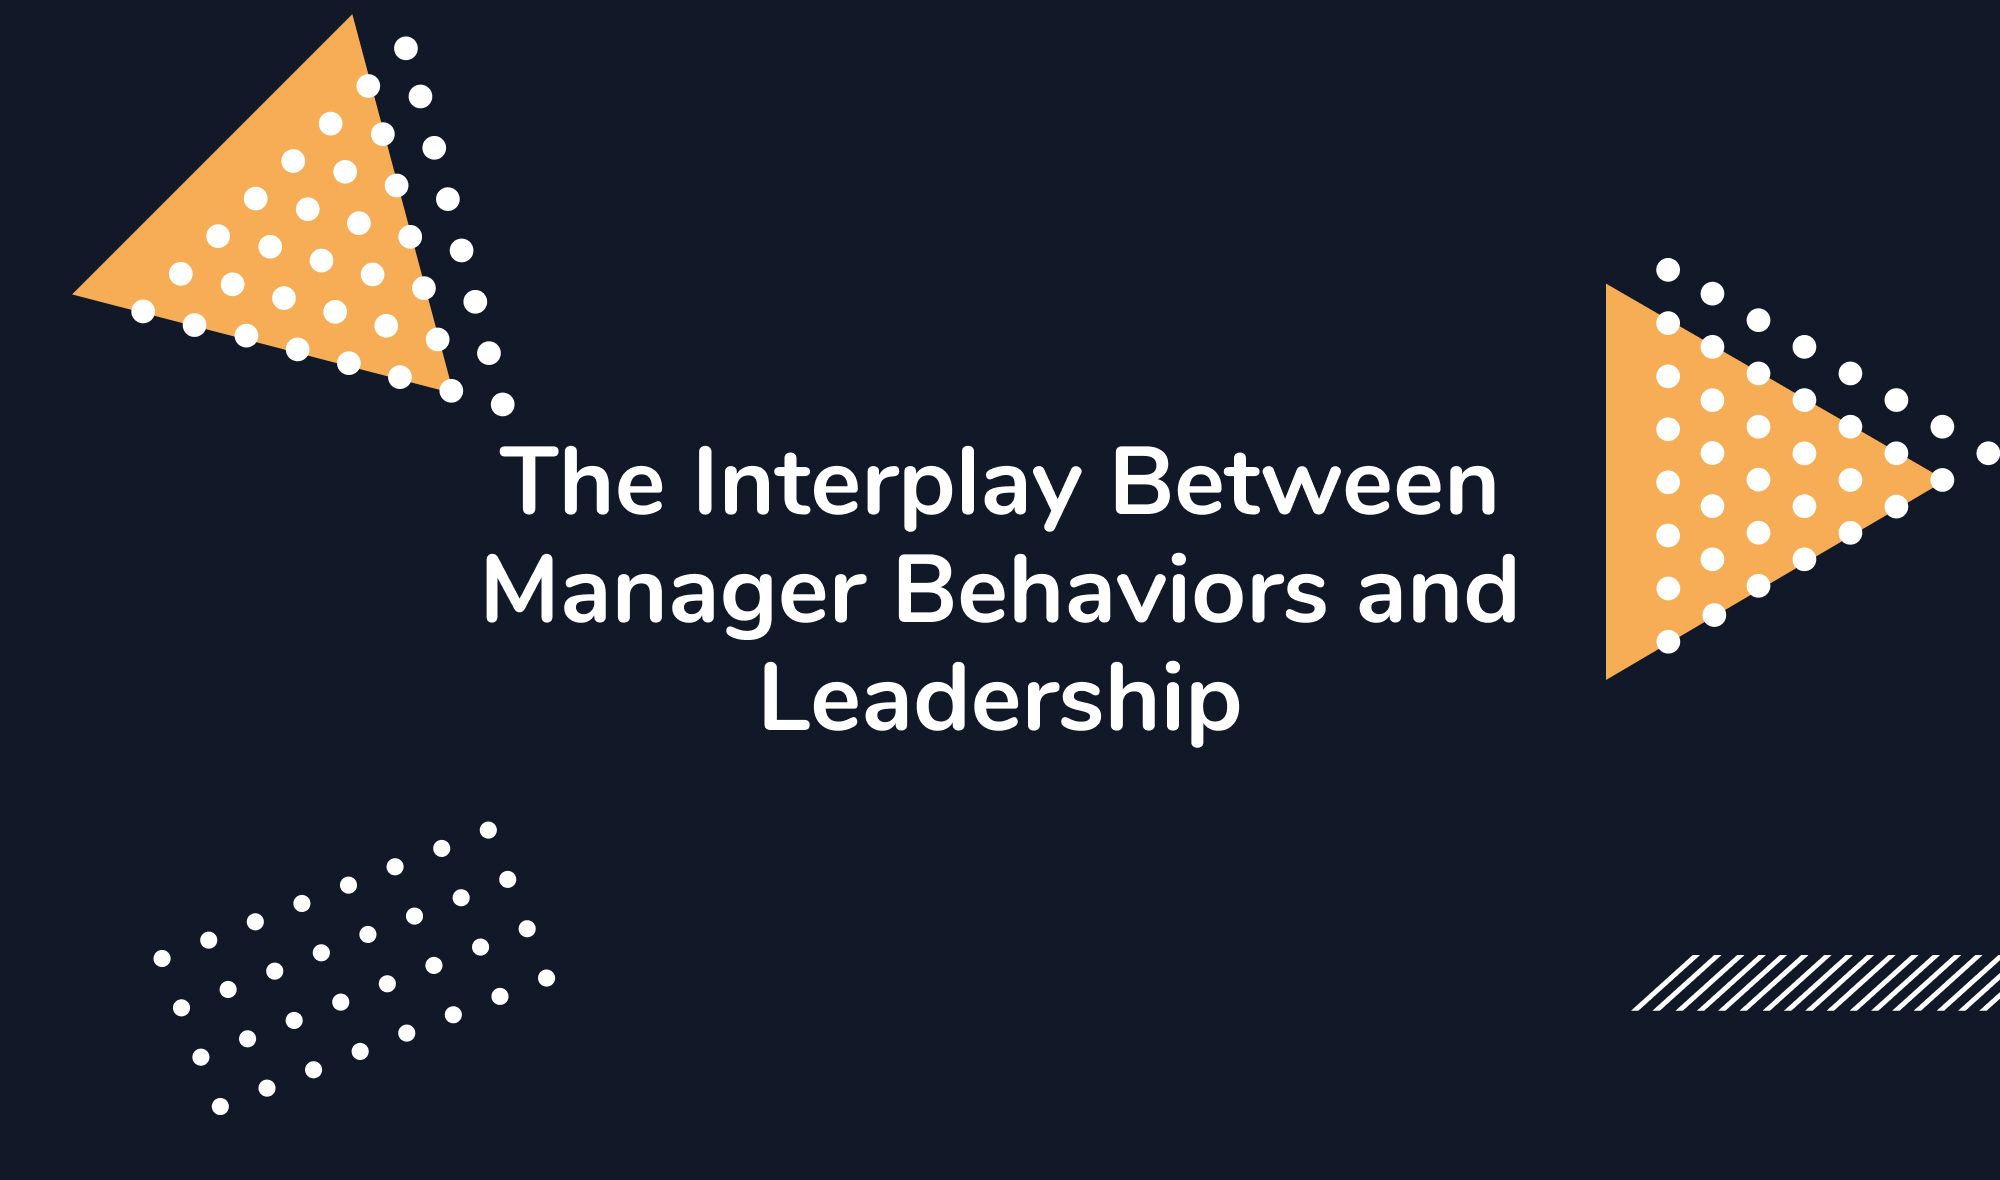 The Interplay Between Manager Behaviors and Leadership